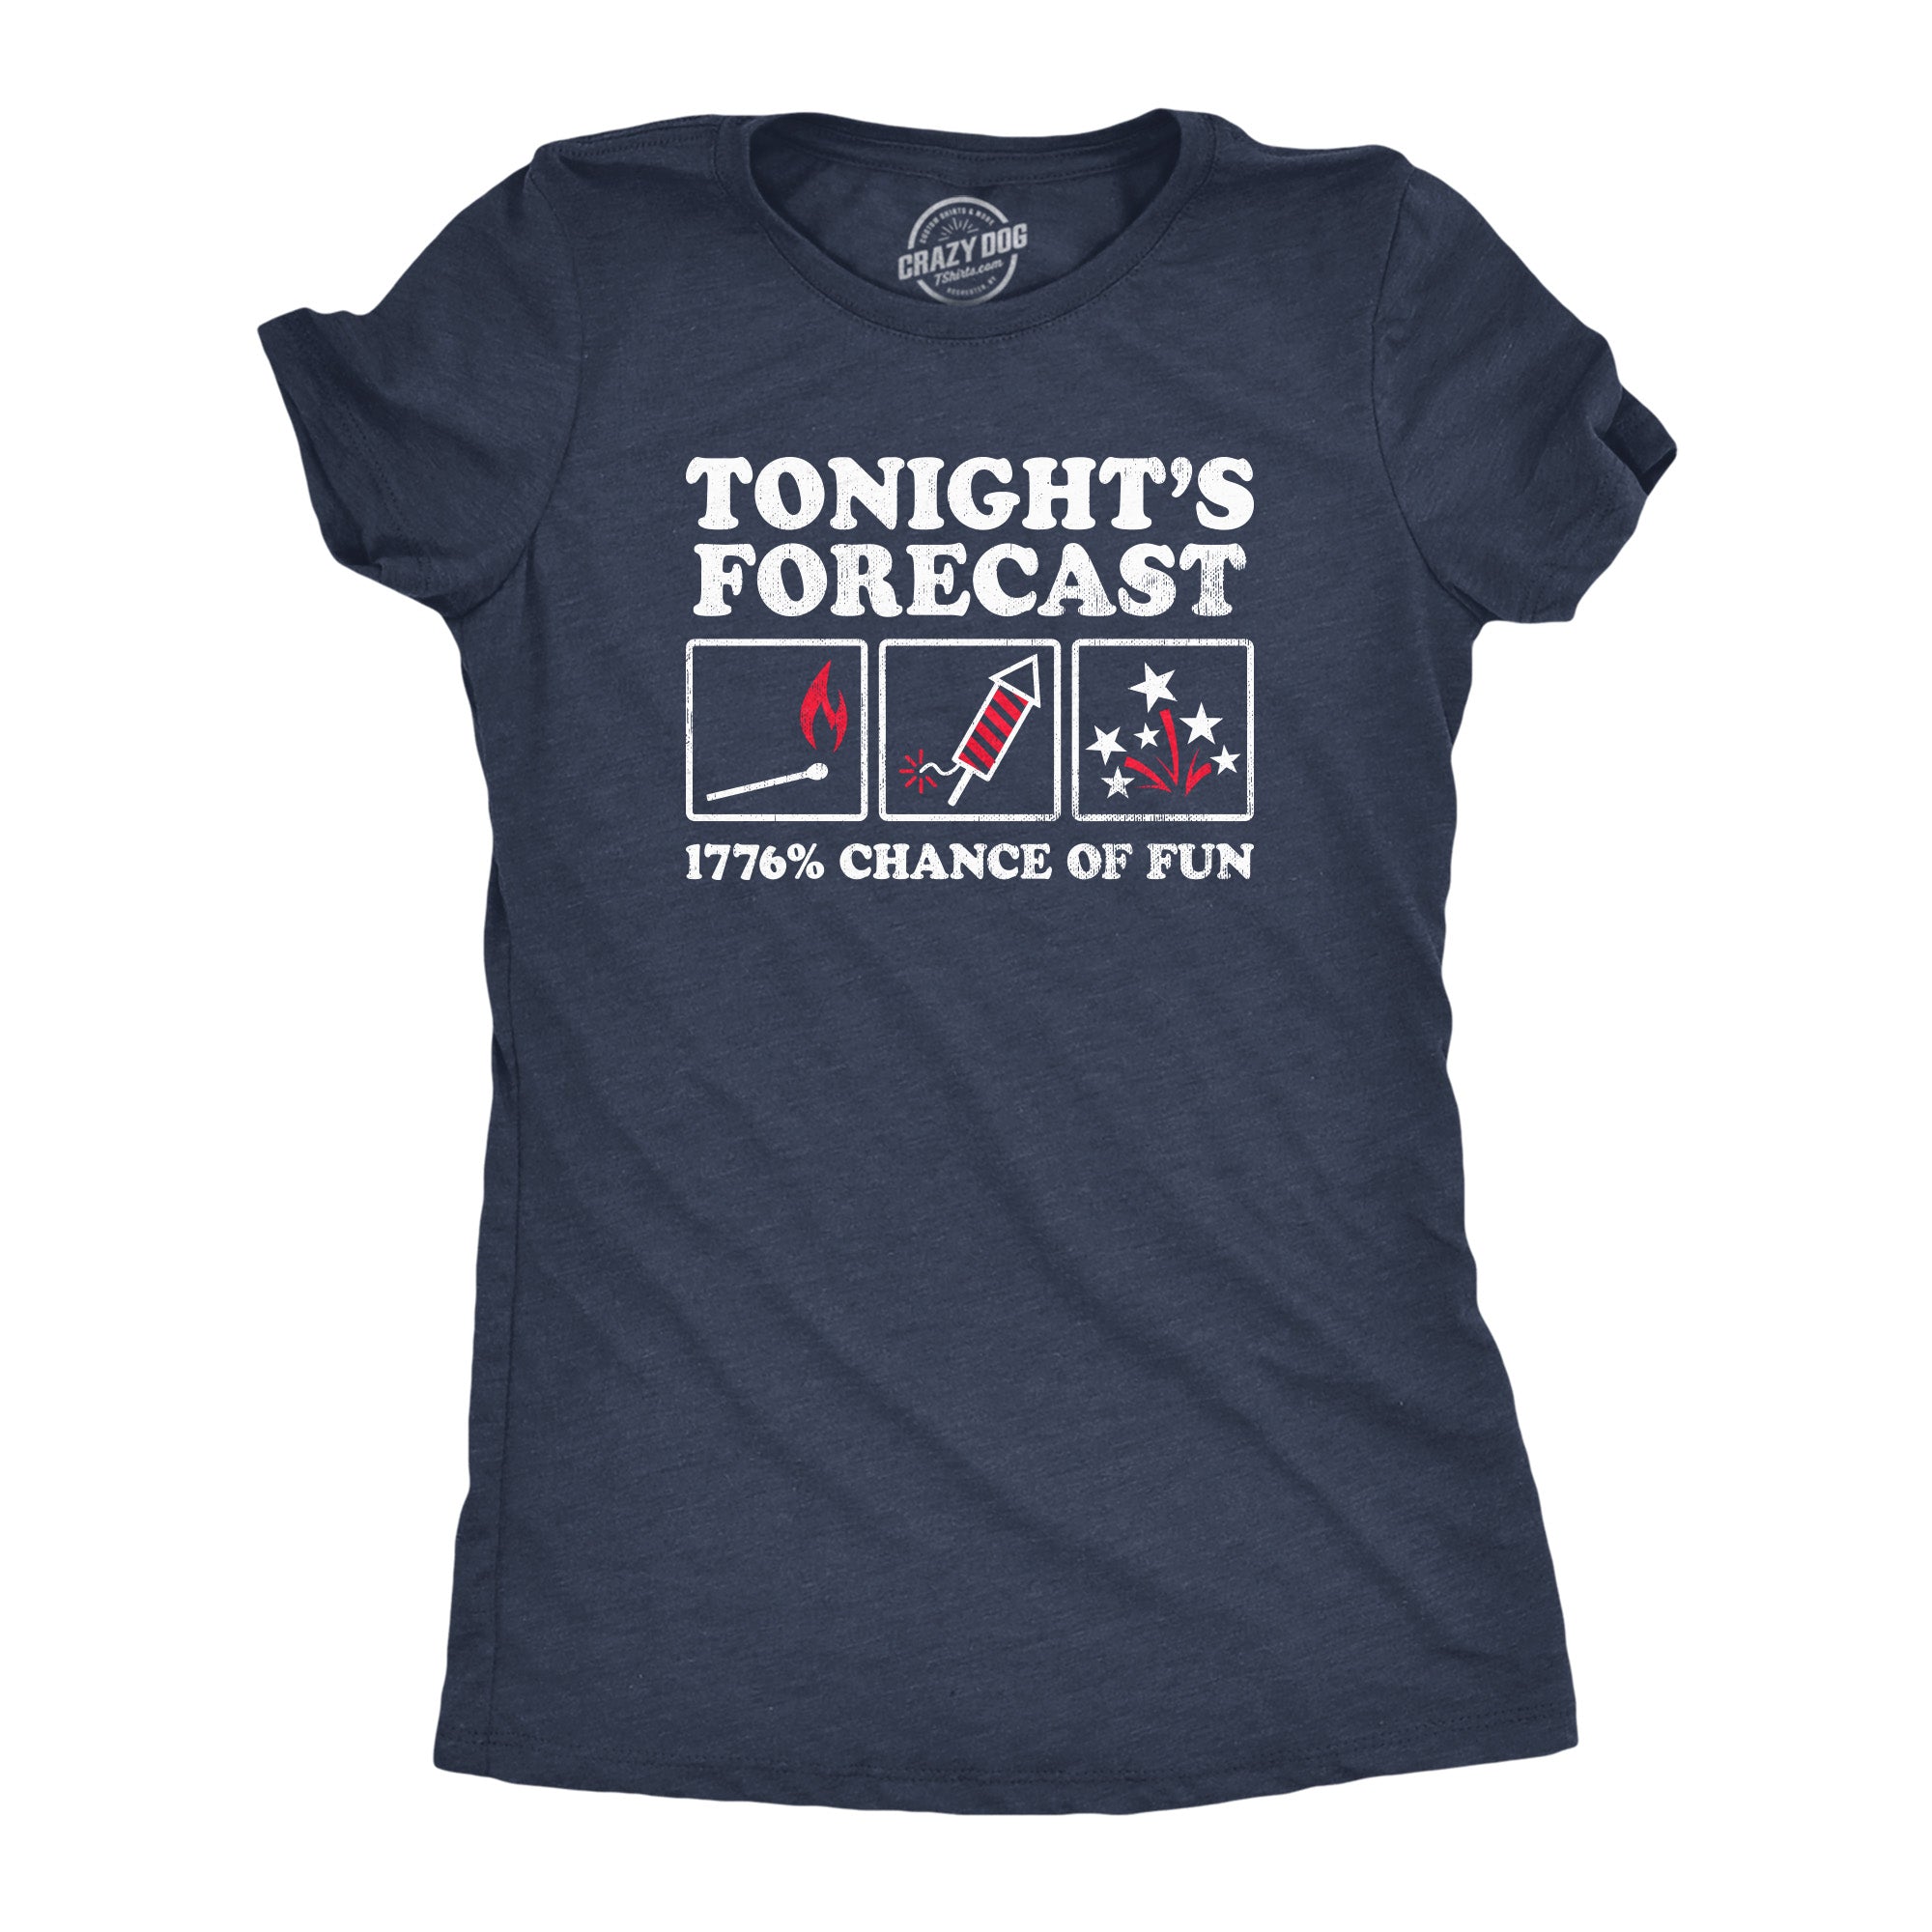 Funny Heather Navy - FORECAST Tonights Forecast 1776 Percent Chance Of Fun Womens T Shirt Nerdy Fourth of July Sarcastic Tee